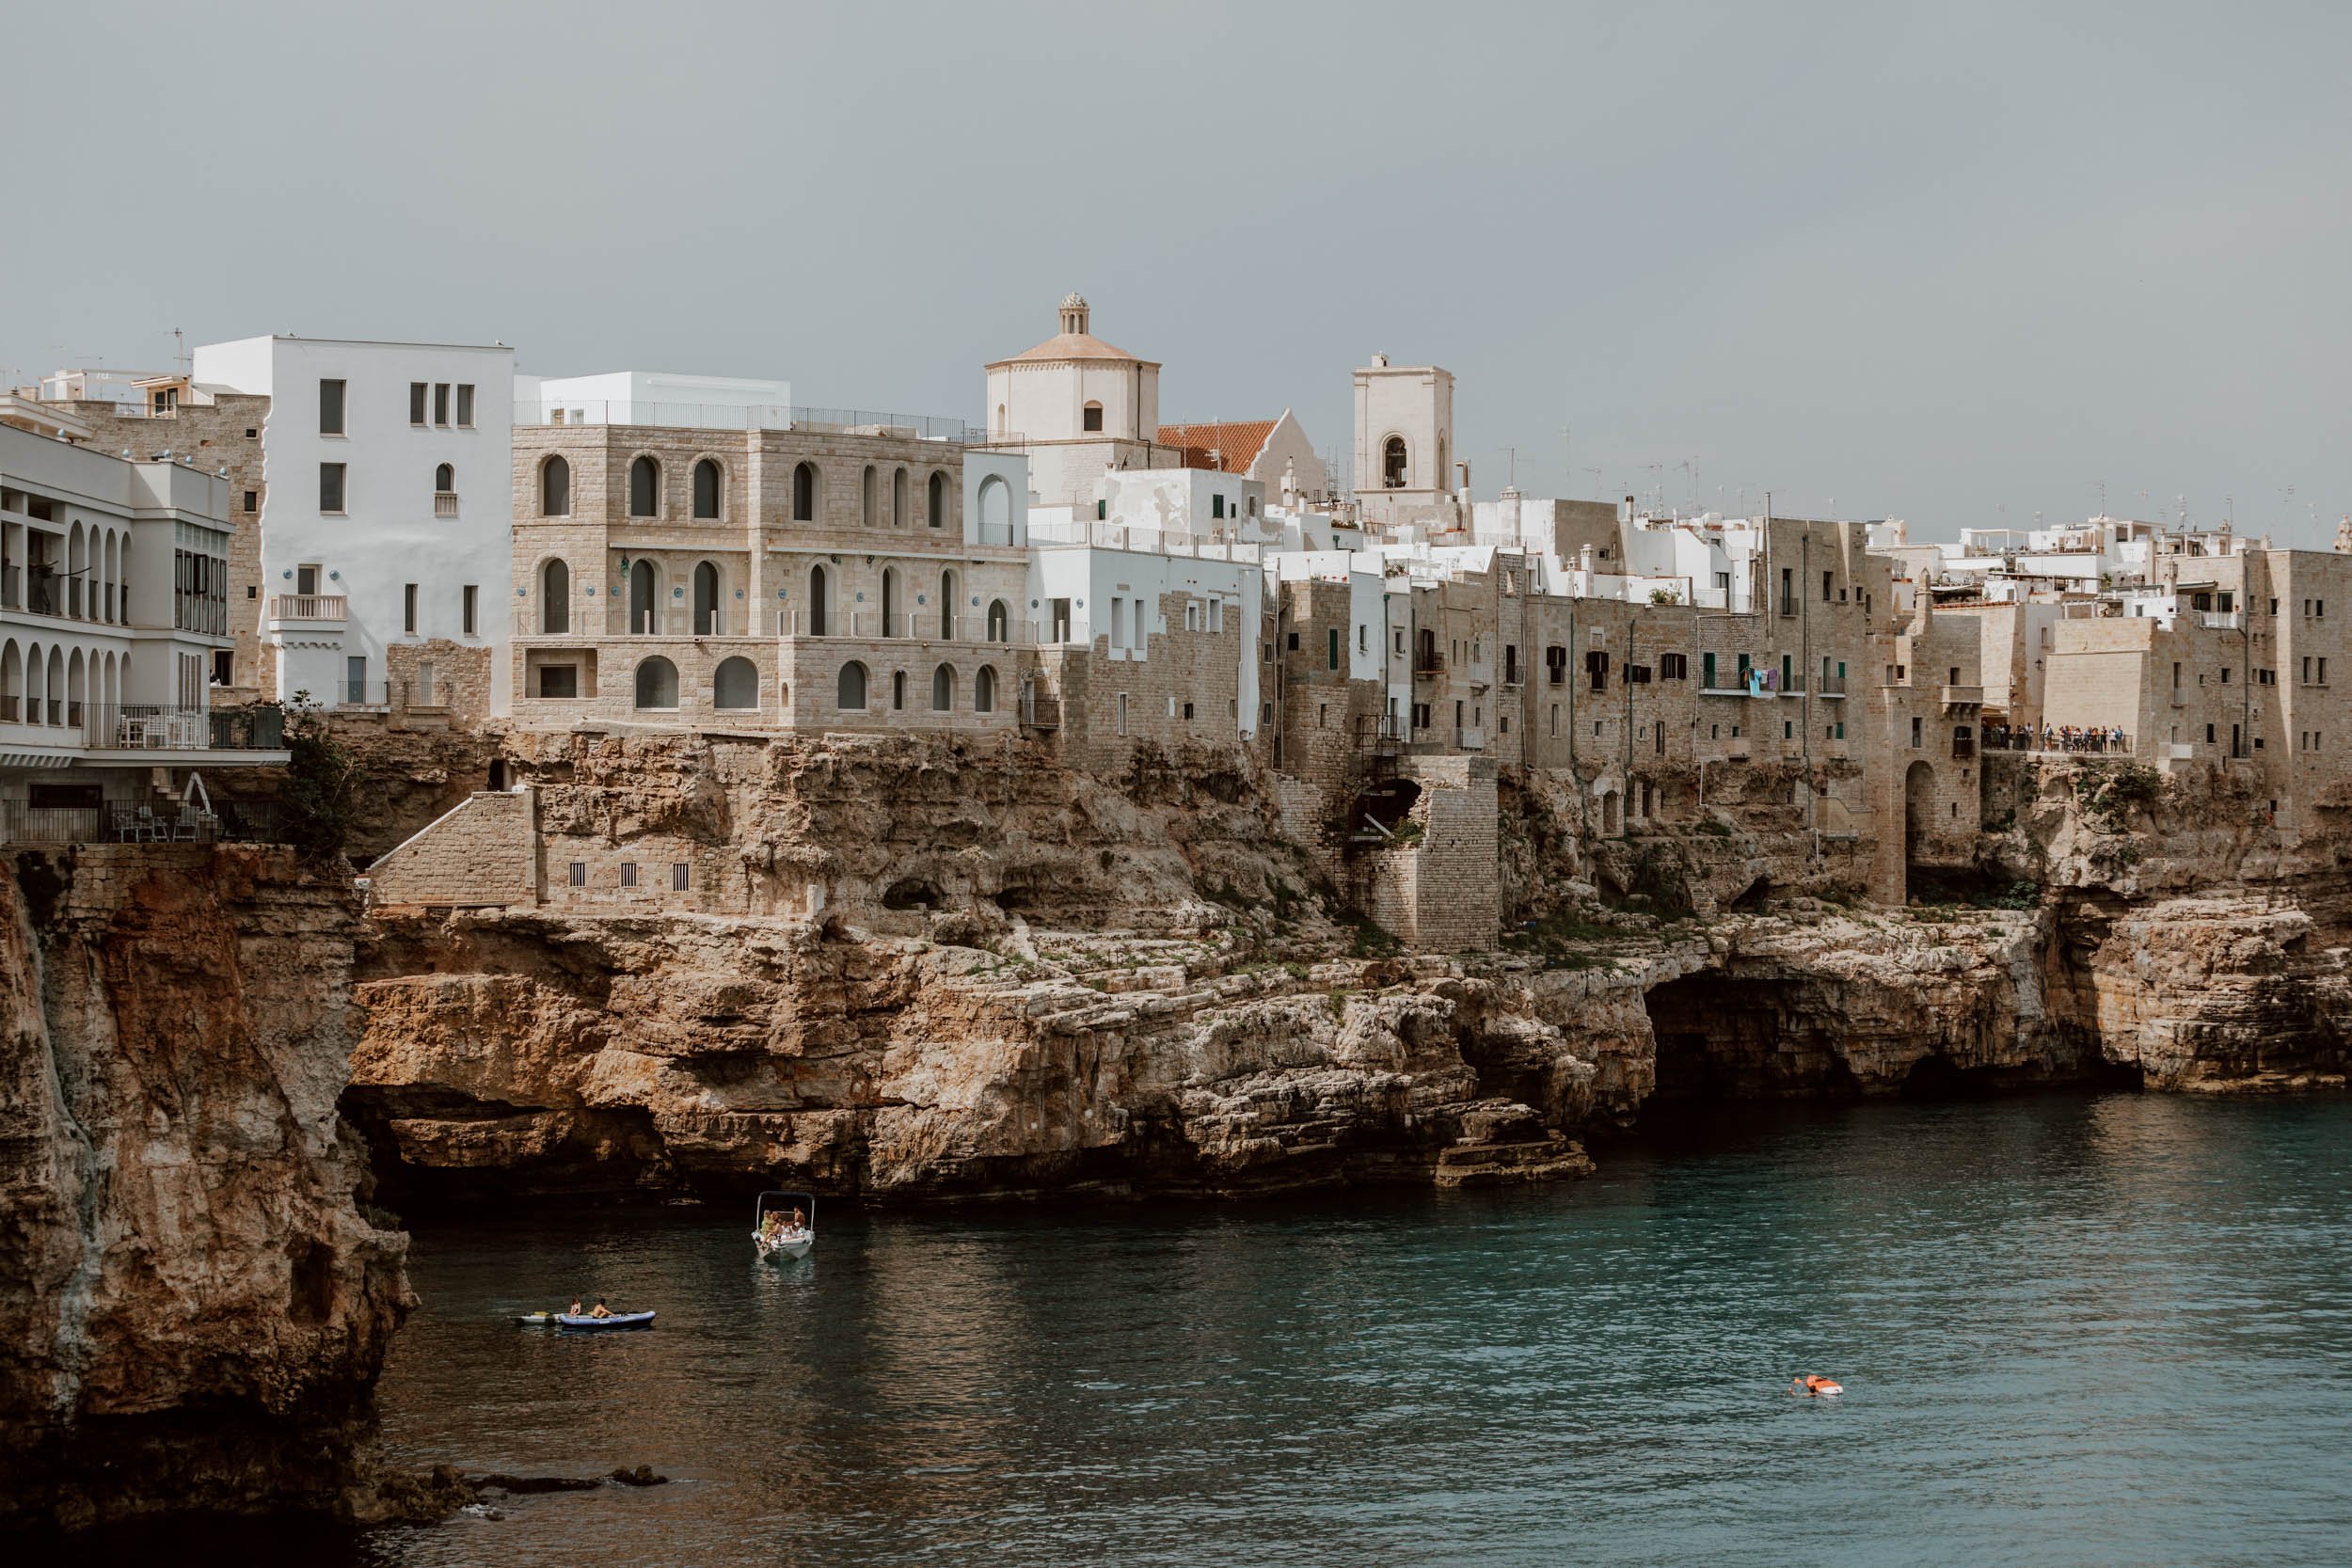 13 Wonderful Things to Do in Polignano a Mare, Italy More Than a Beach — ALONG DUSTY ROADS